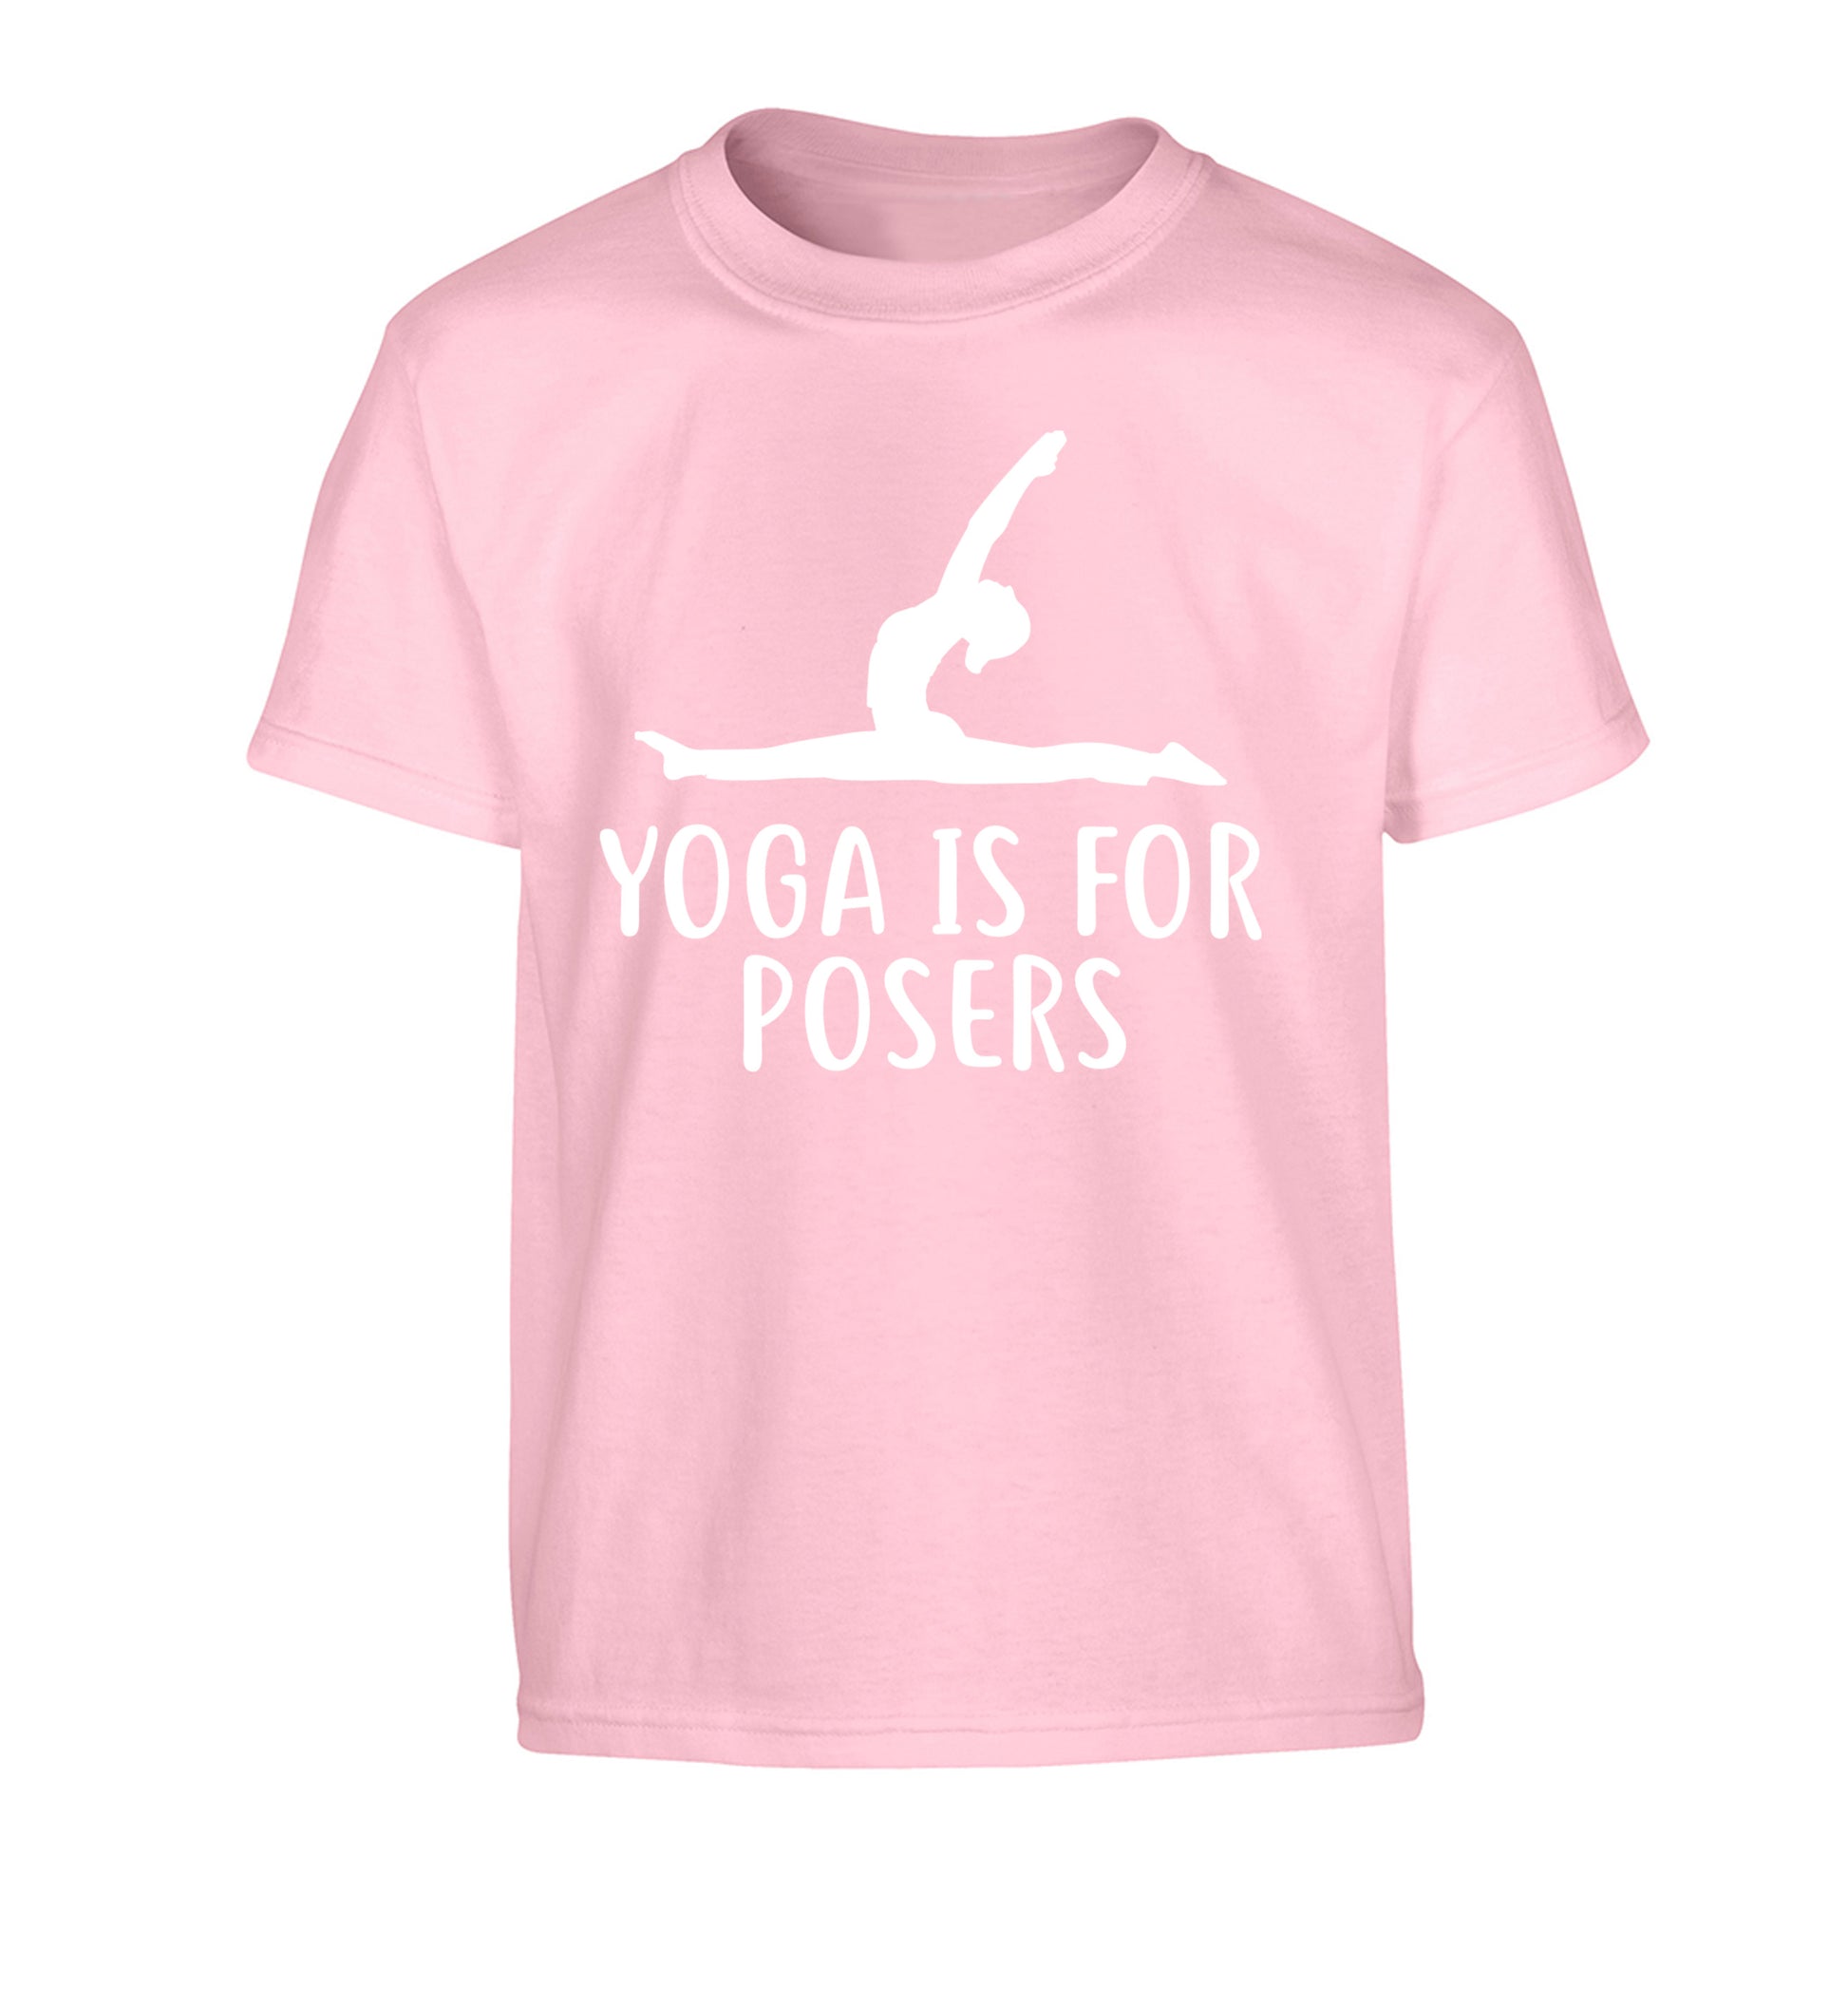 Yoga is for posers Children's light pink Tshirt 12-13 Years